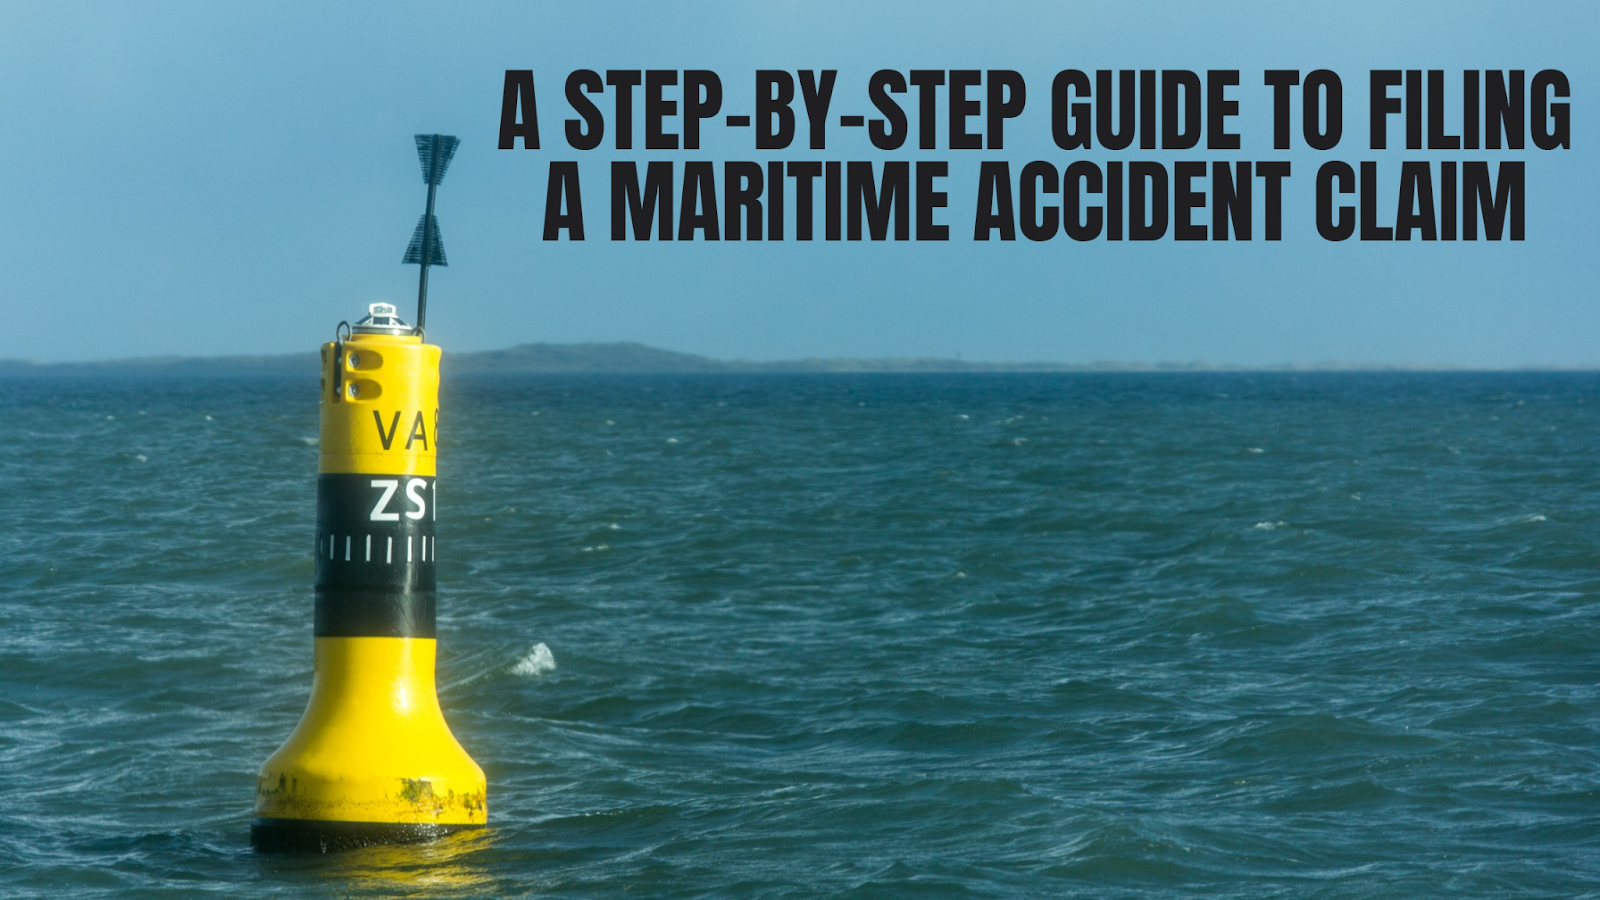 A Step-by-Step Guide to Filing a Maritime Accident Claim